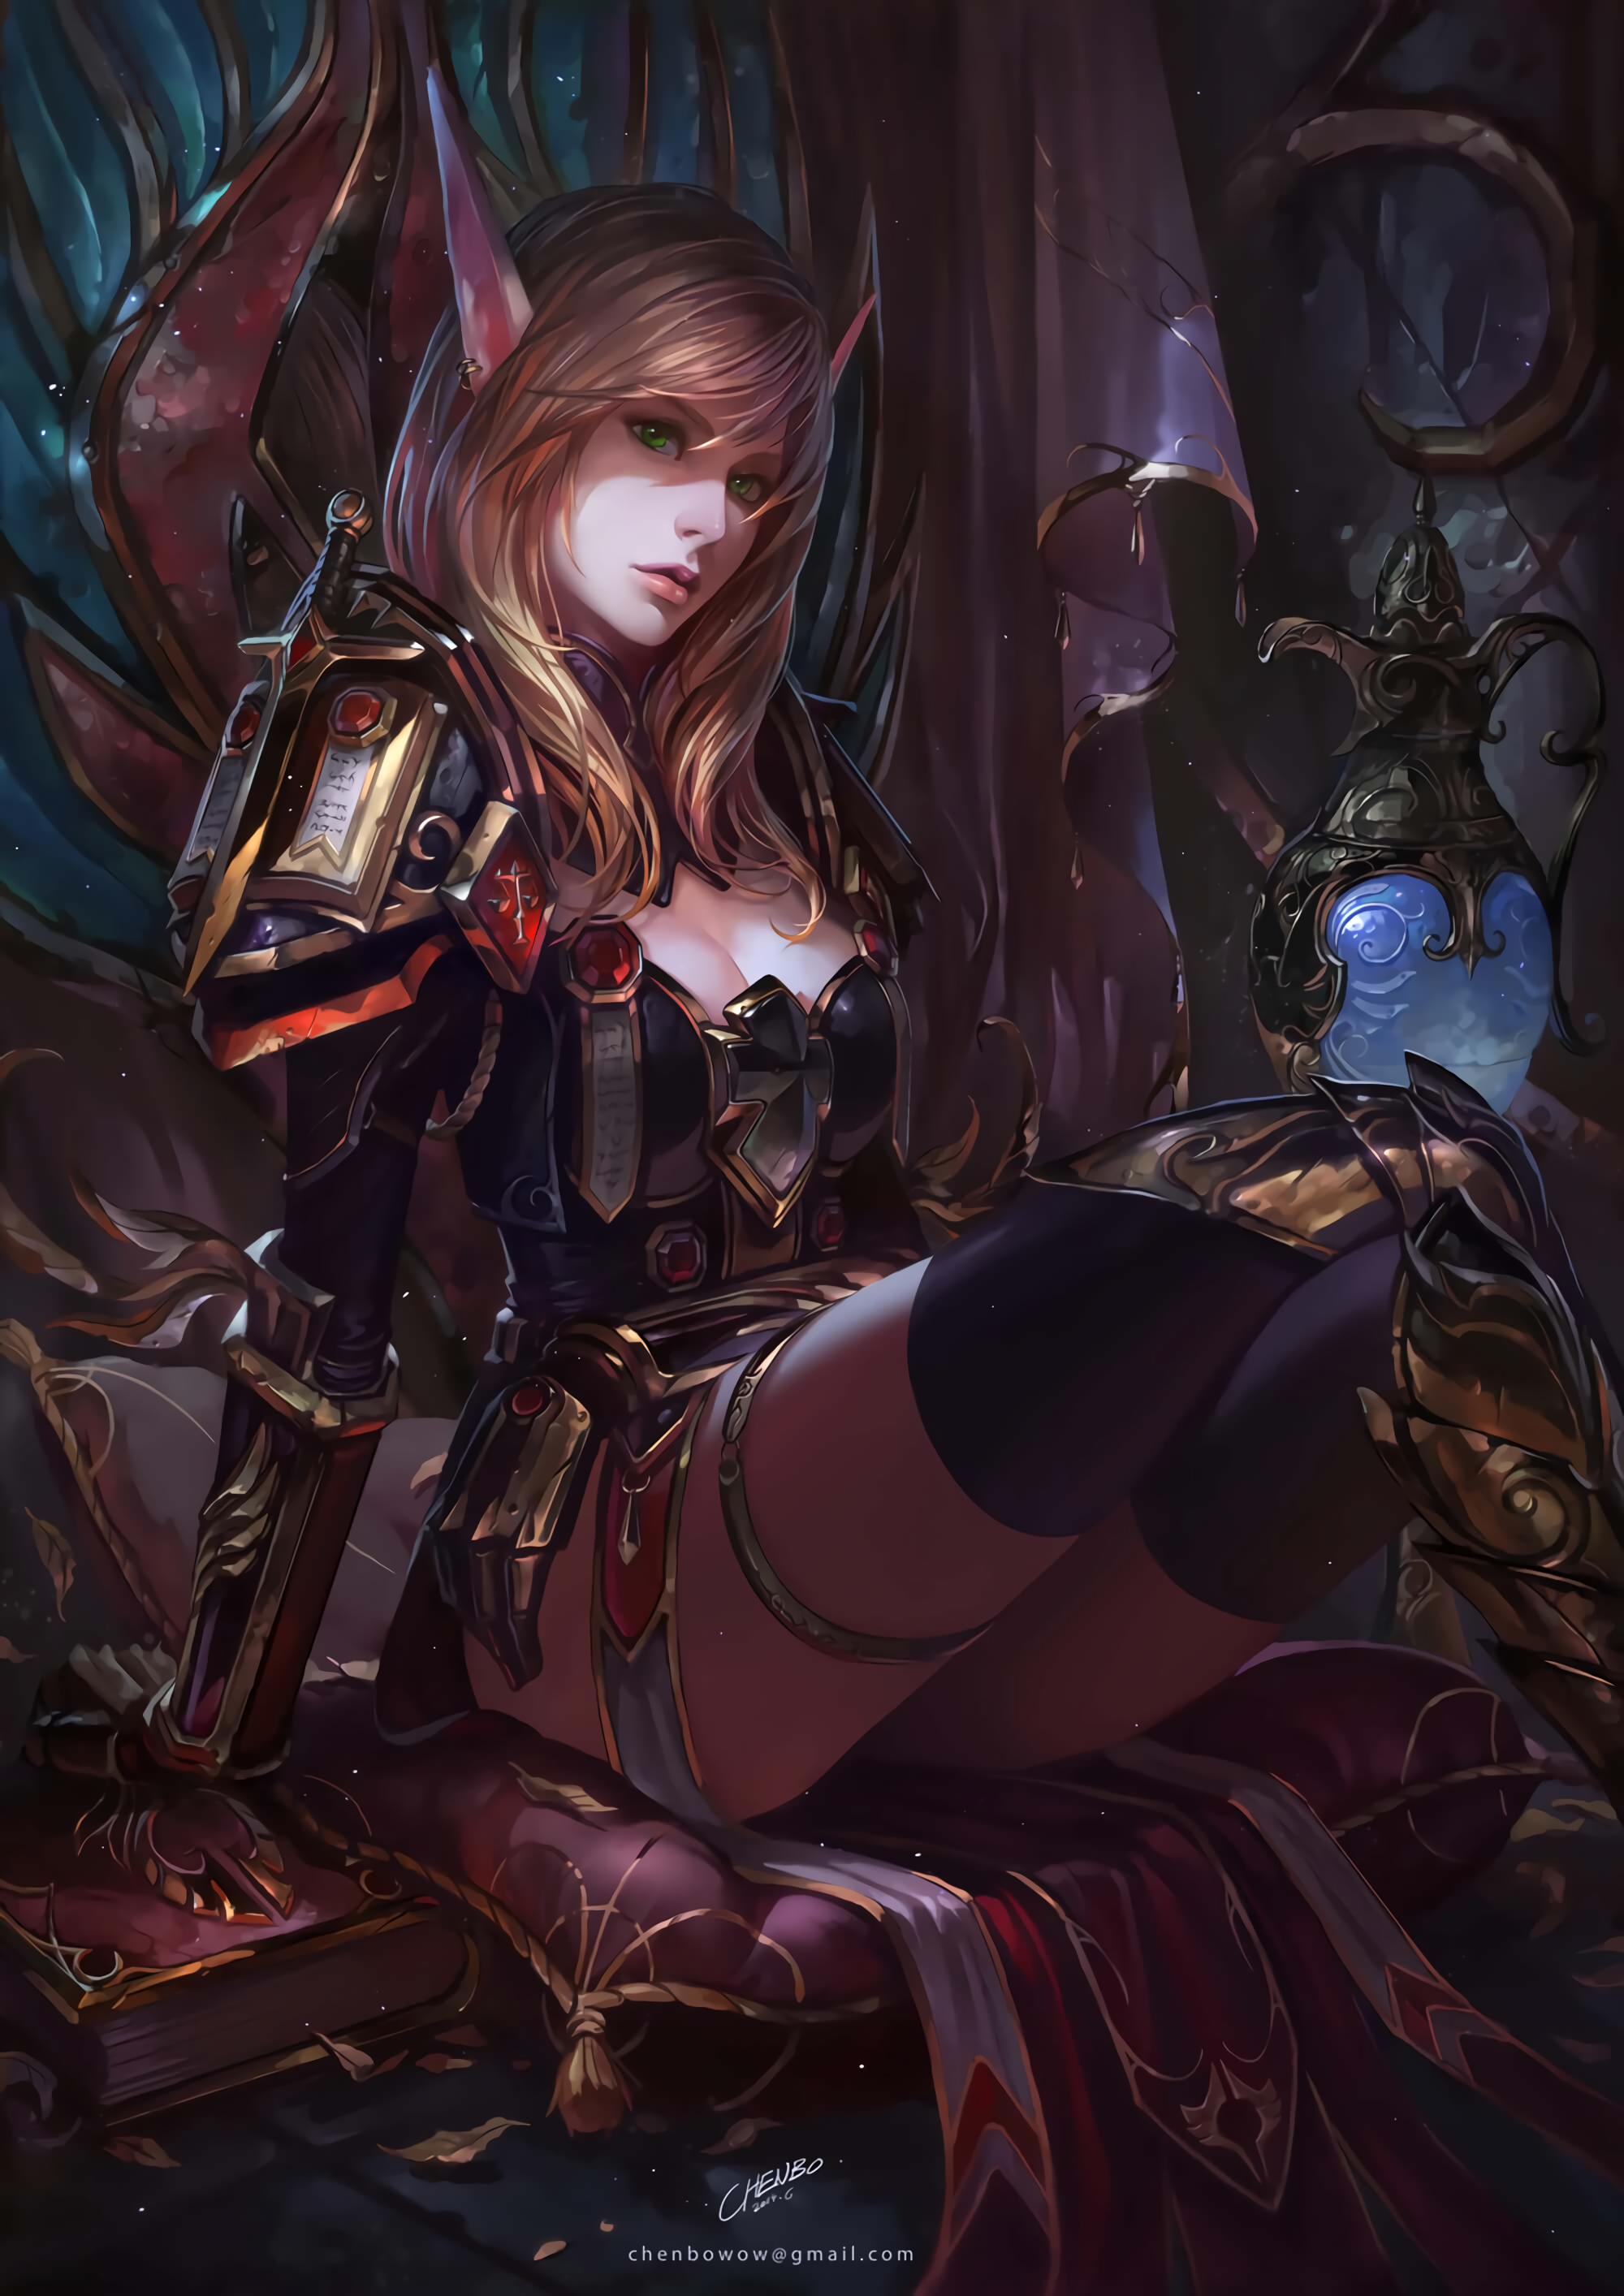 General 2000x2828 digital art artwork portrait portrait display video games Blizzard Entertainment women Warcraft World of Warcraft pointy ears looking at viewer blonde Chenbo thighs thigh-highs cleavage blue eyes blood elves elves